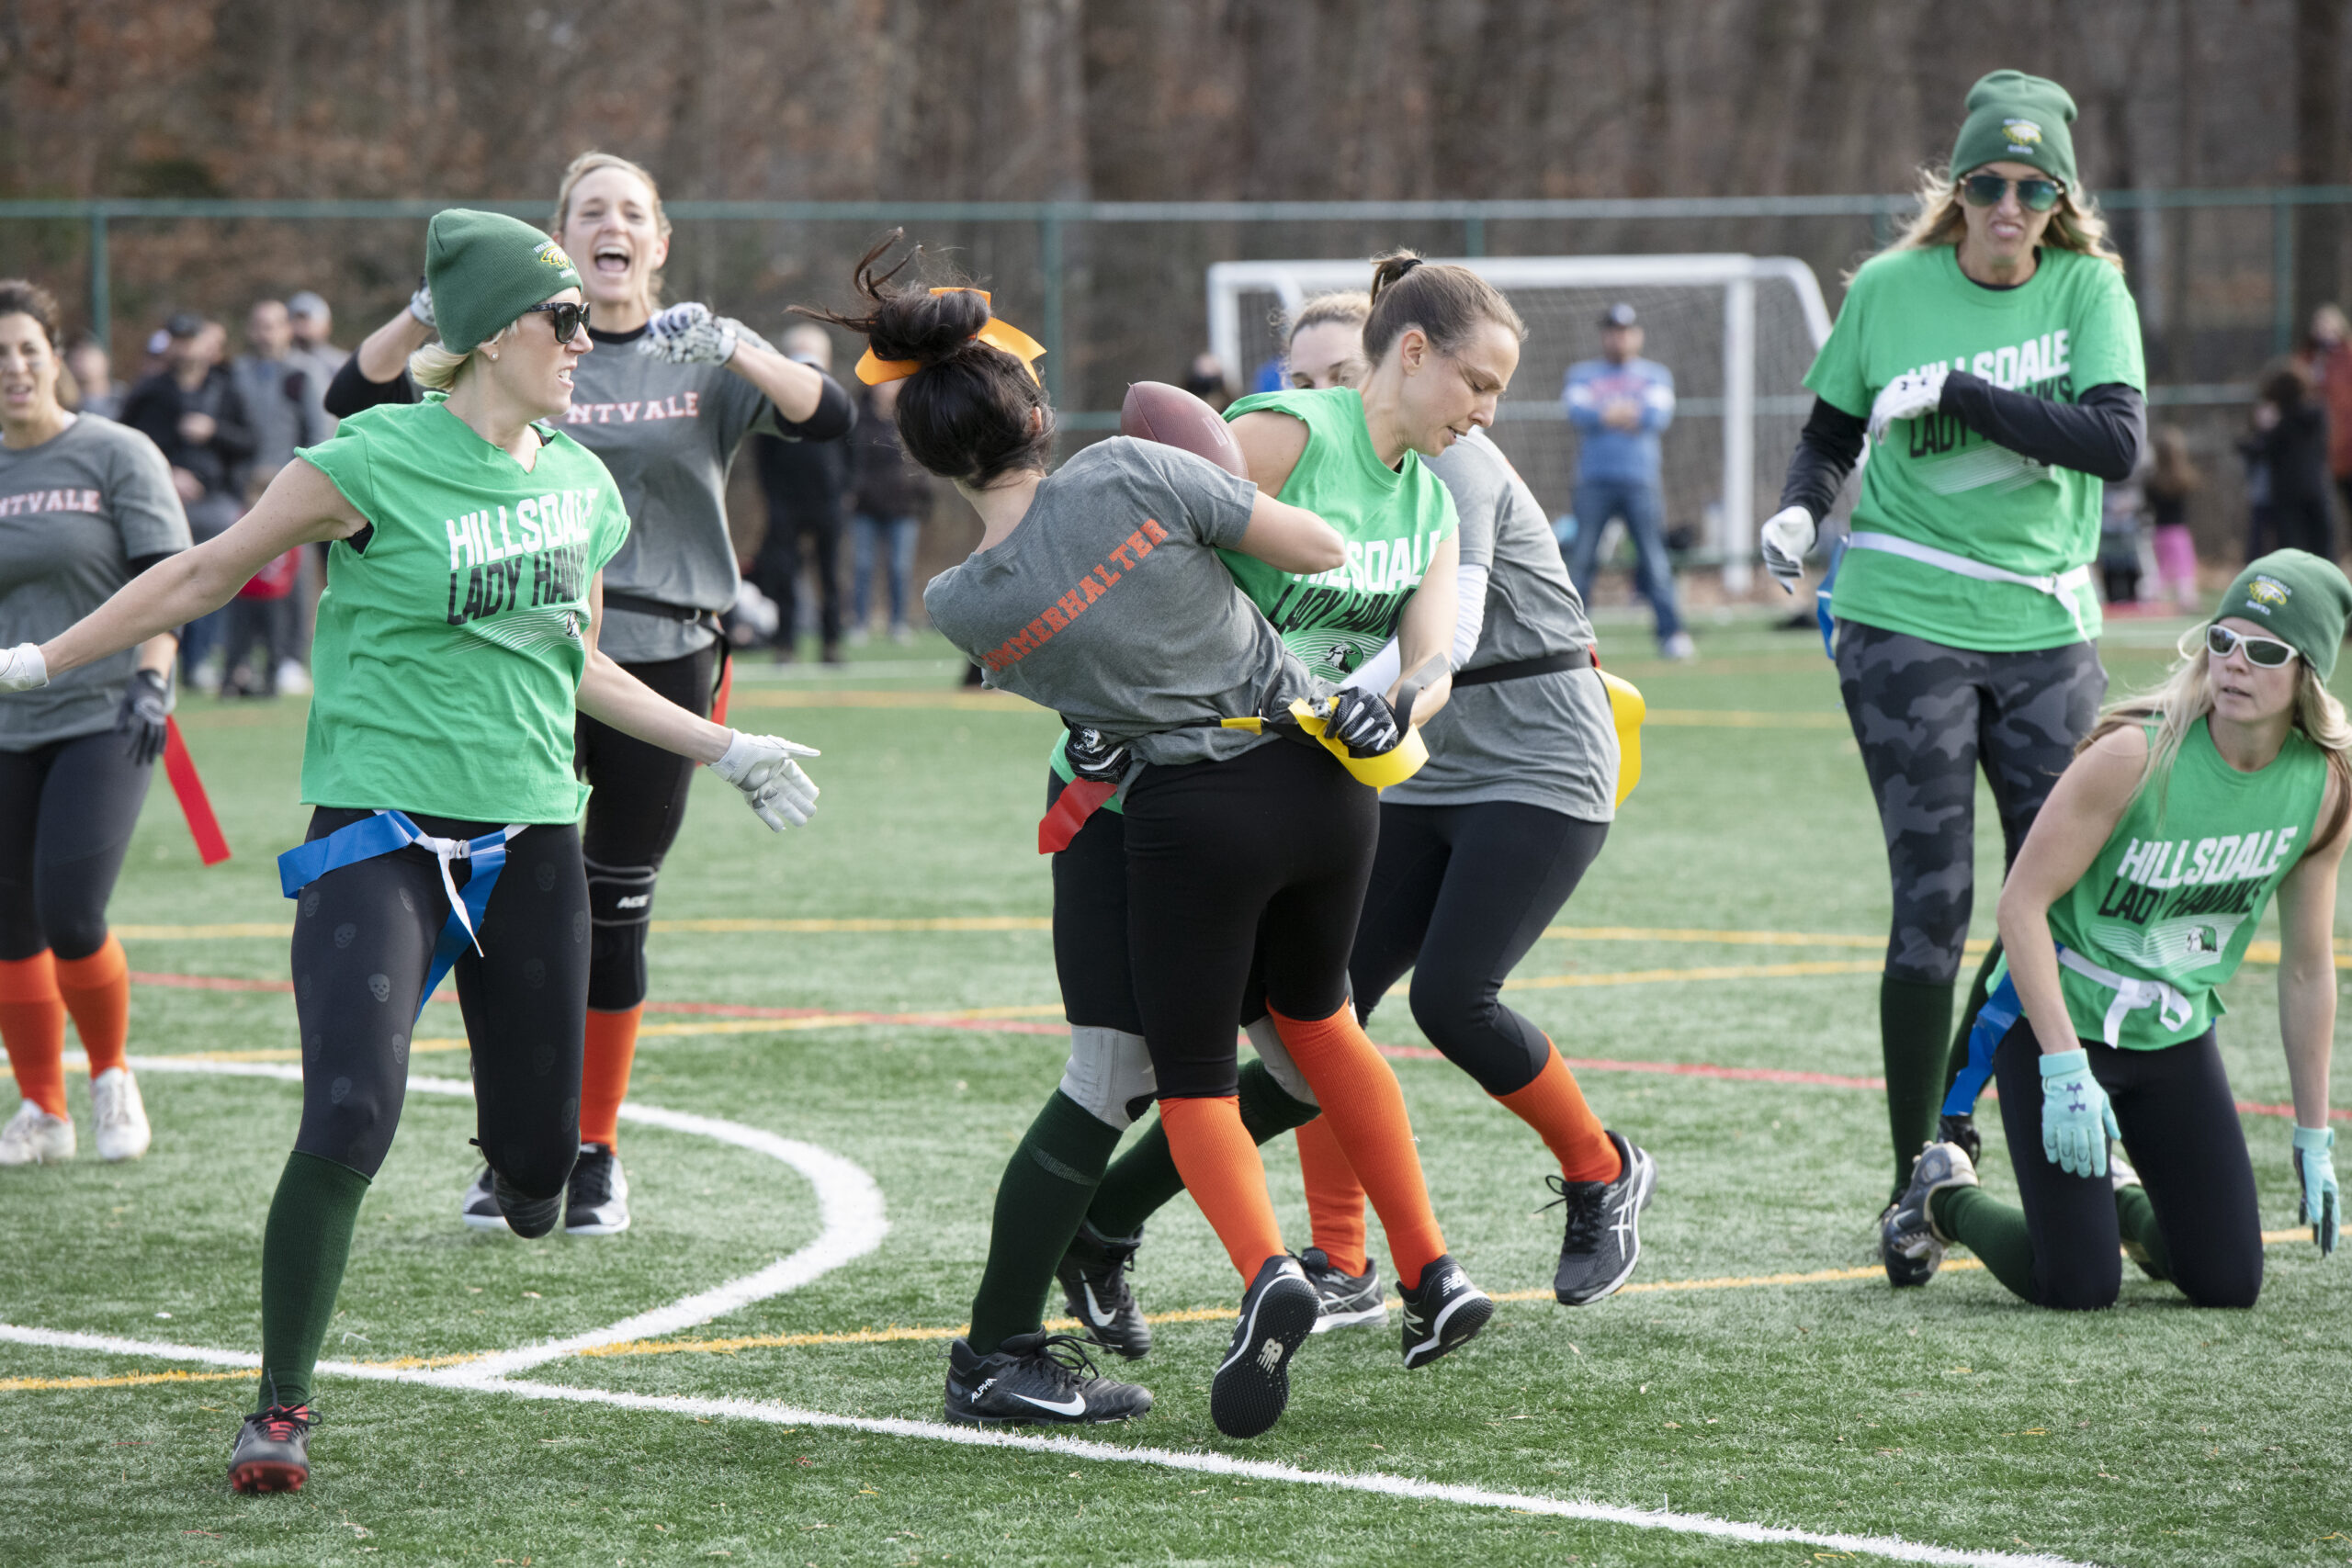 Bringing It: Hillsdale Montvale Moms in 3rd Annual Charity Clash. 